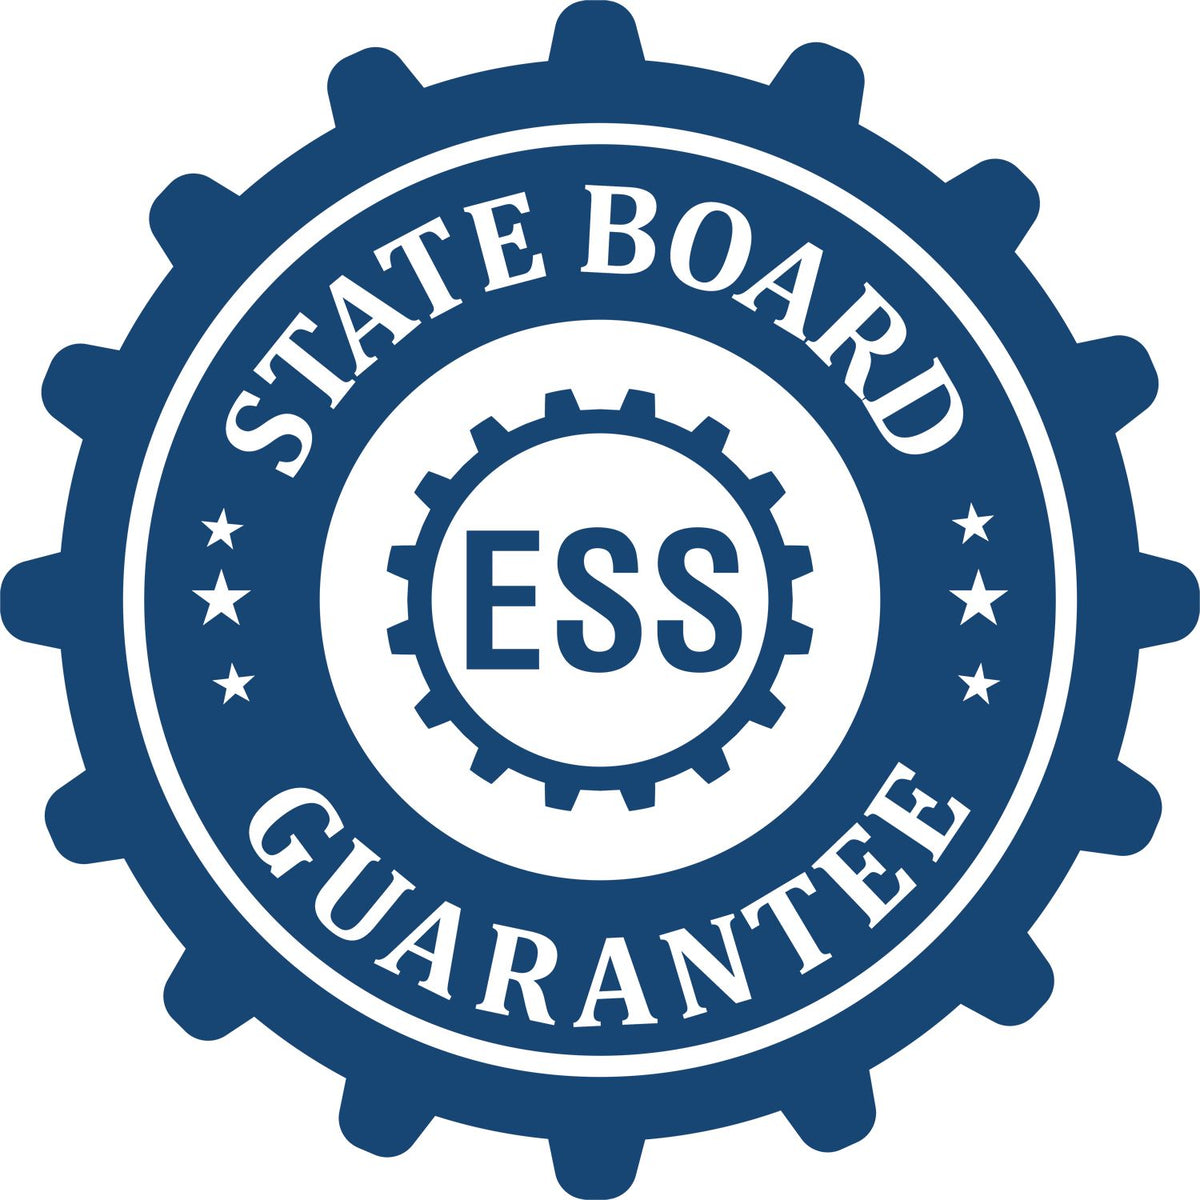 An emblem in a gear shape illustrating a state board guarantee for the Digital Delaware PE Stamp and Electronic Seal for Delaware Engineer product.